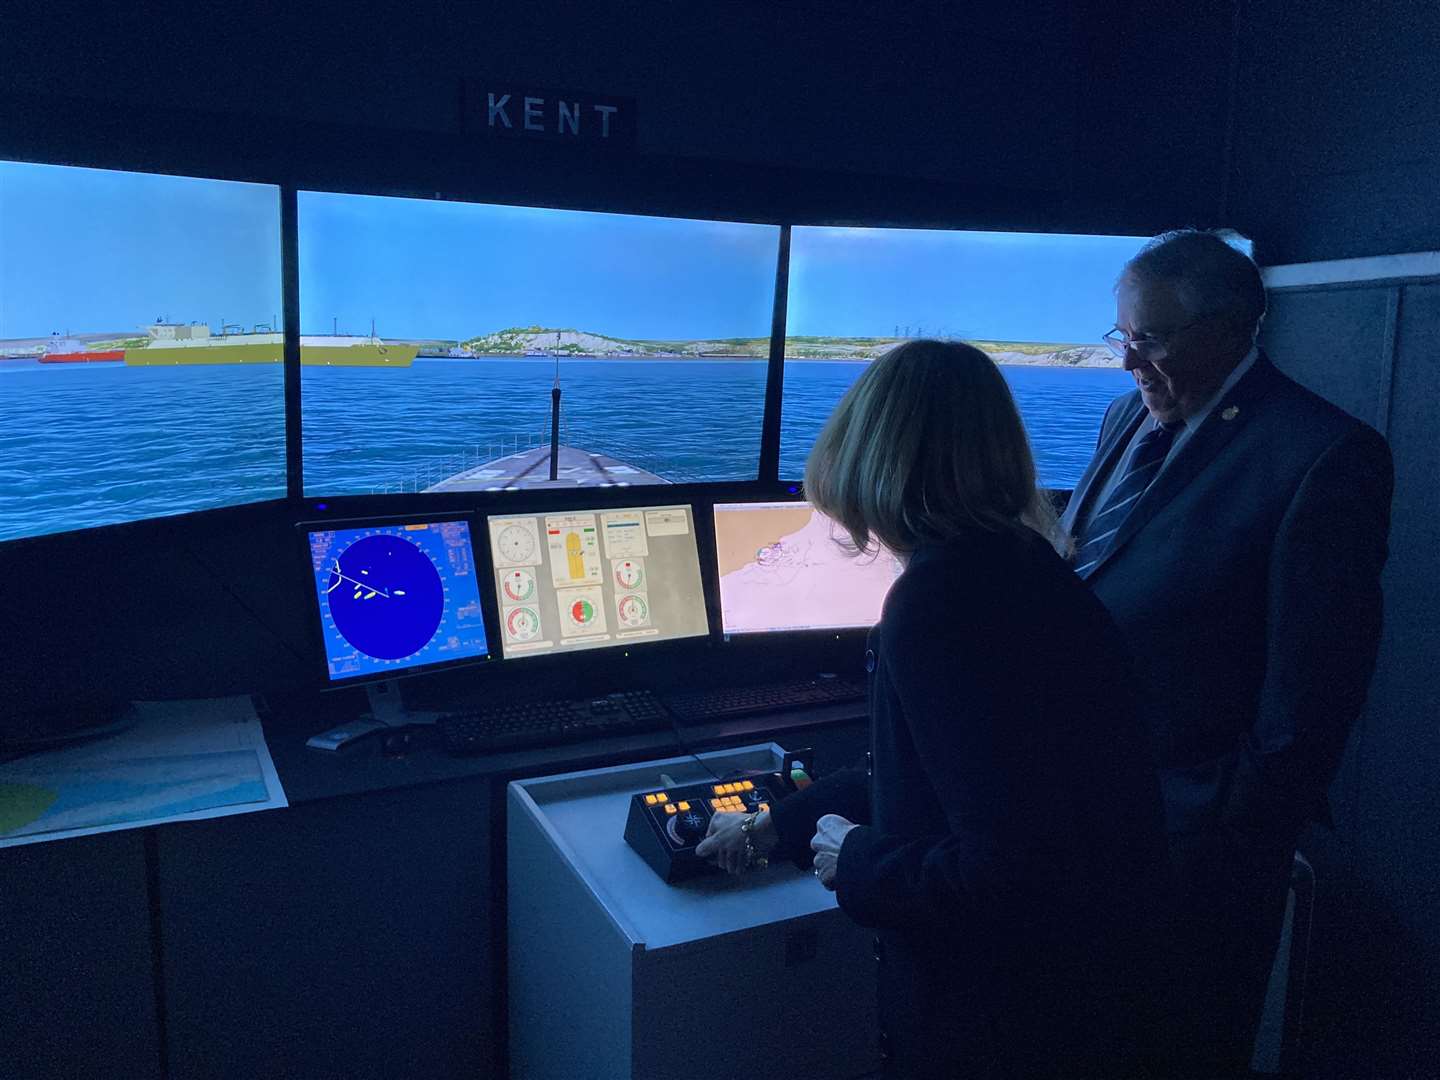 Lord Lieutenant of Kent Lady Colgrain tries out the ship simulator at Sheppey Sea Cadets' headquarters at Barton's Point, Sheerness, after the presentation of The Queen's Award for Voluntary Service